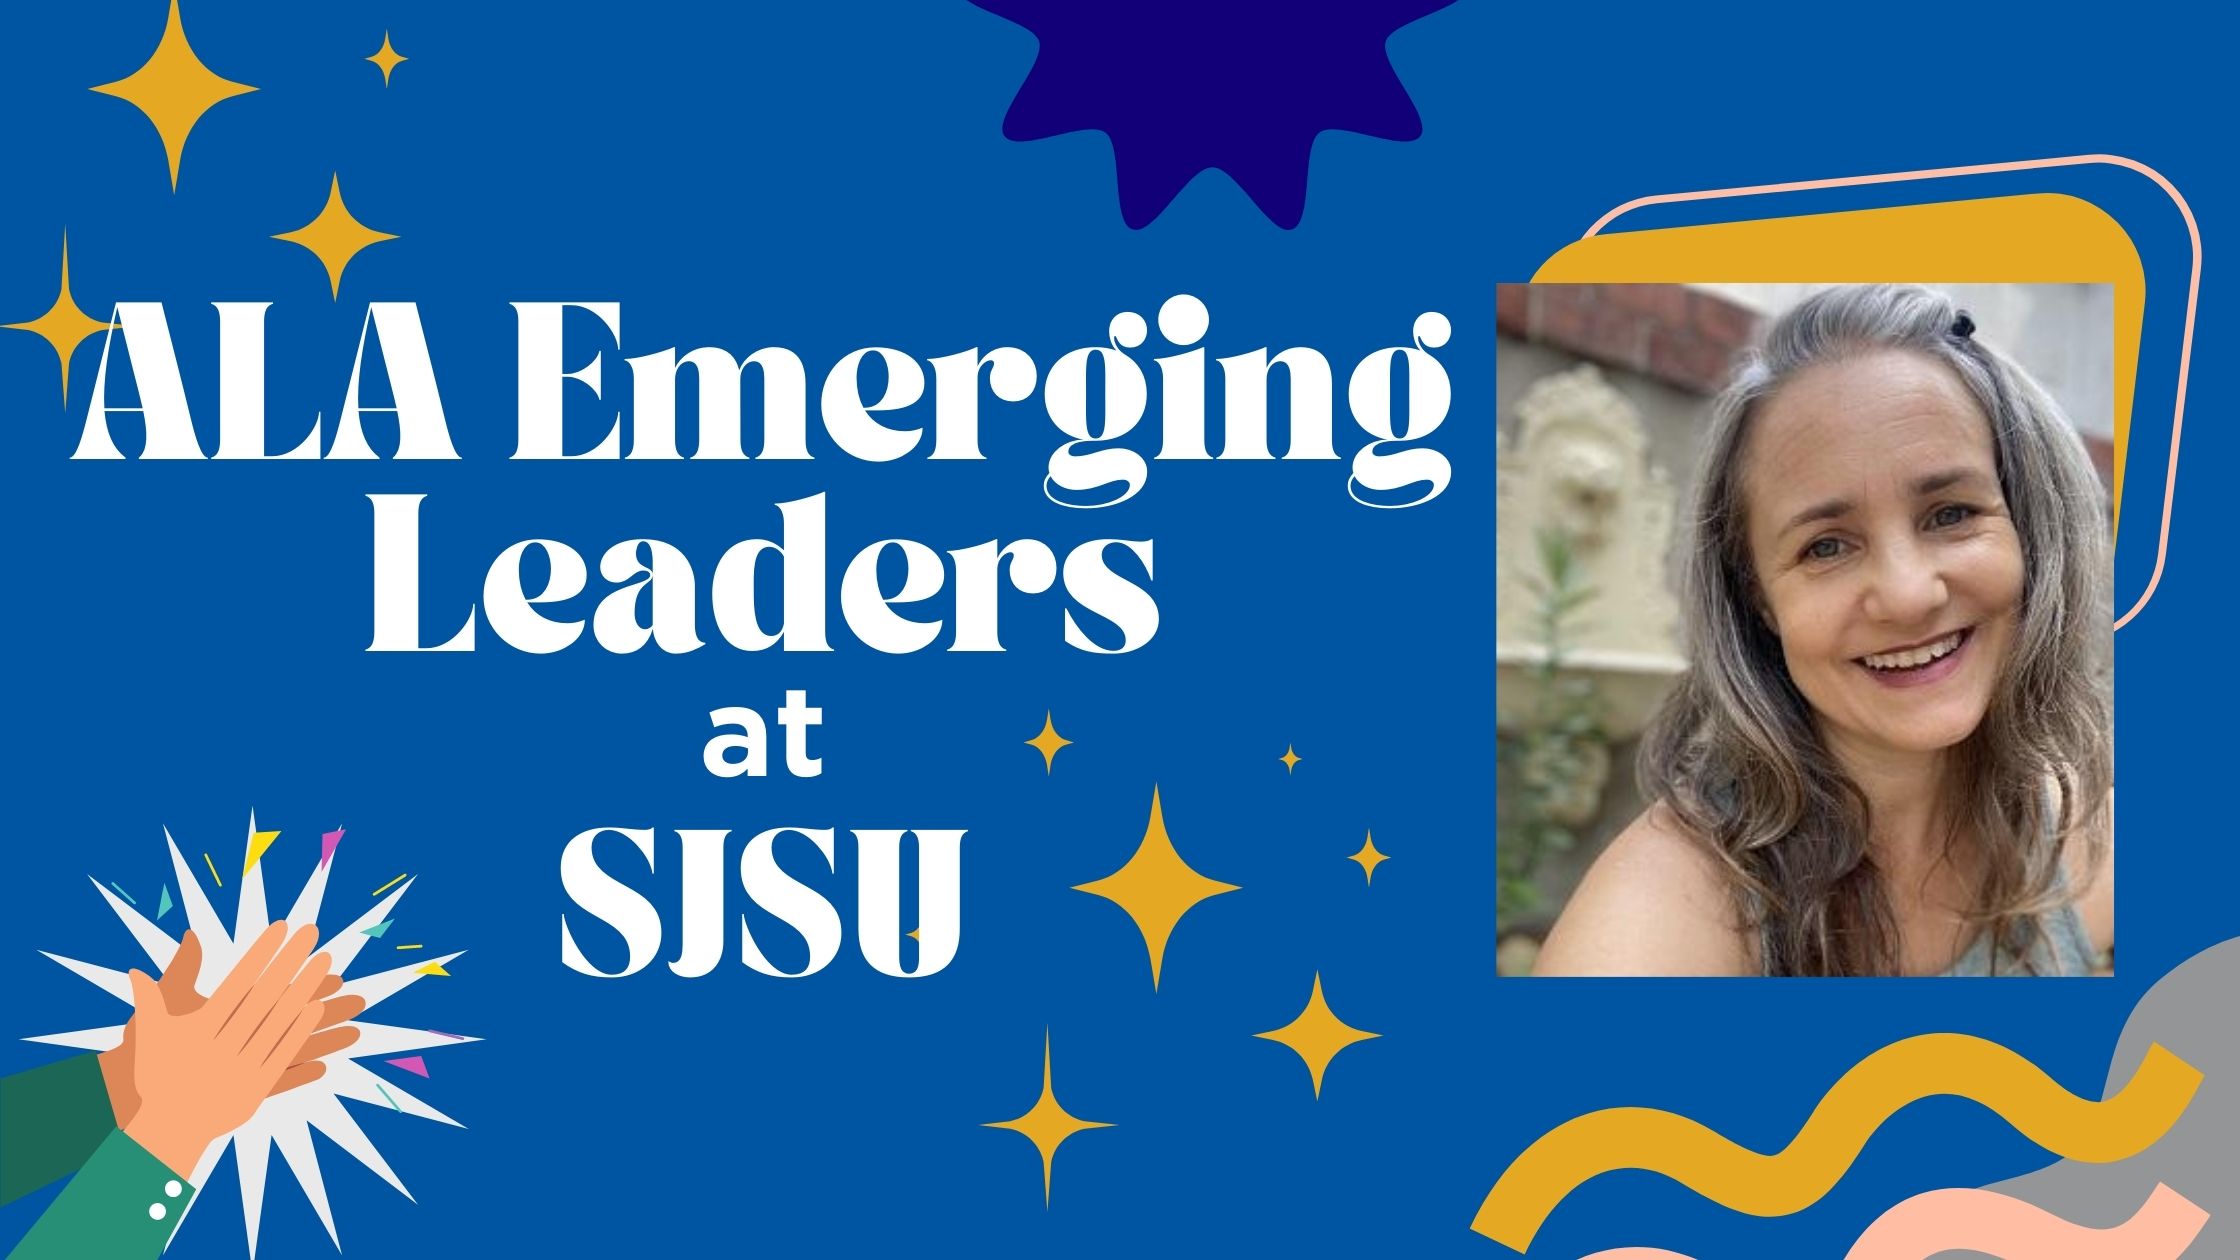 You are currently viewing Emerging Leaders at SJSU